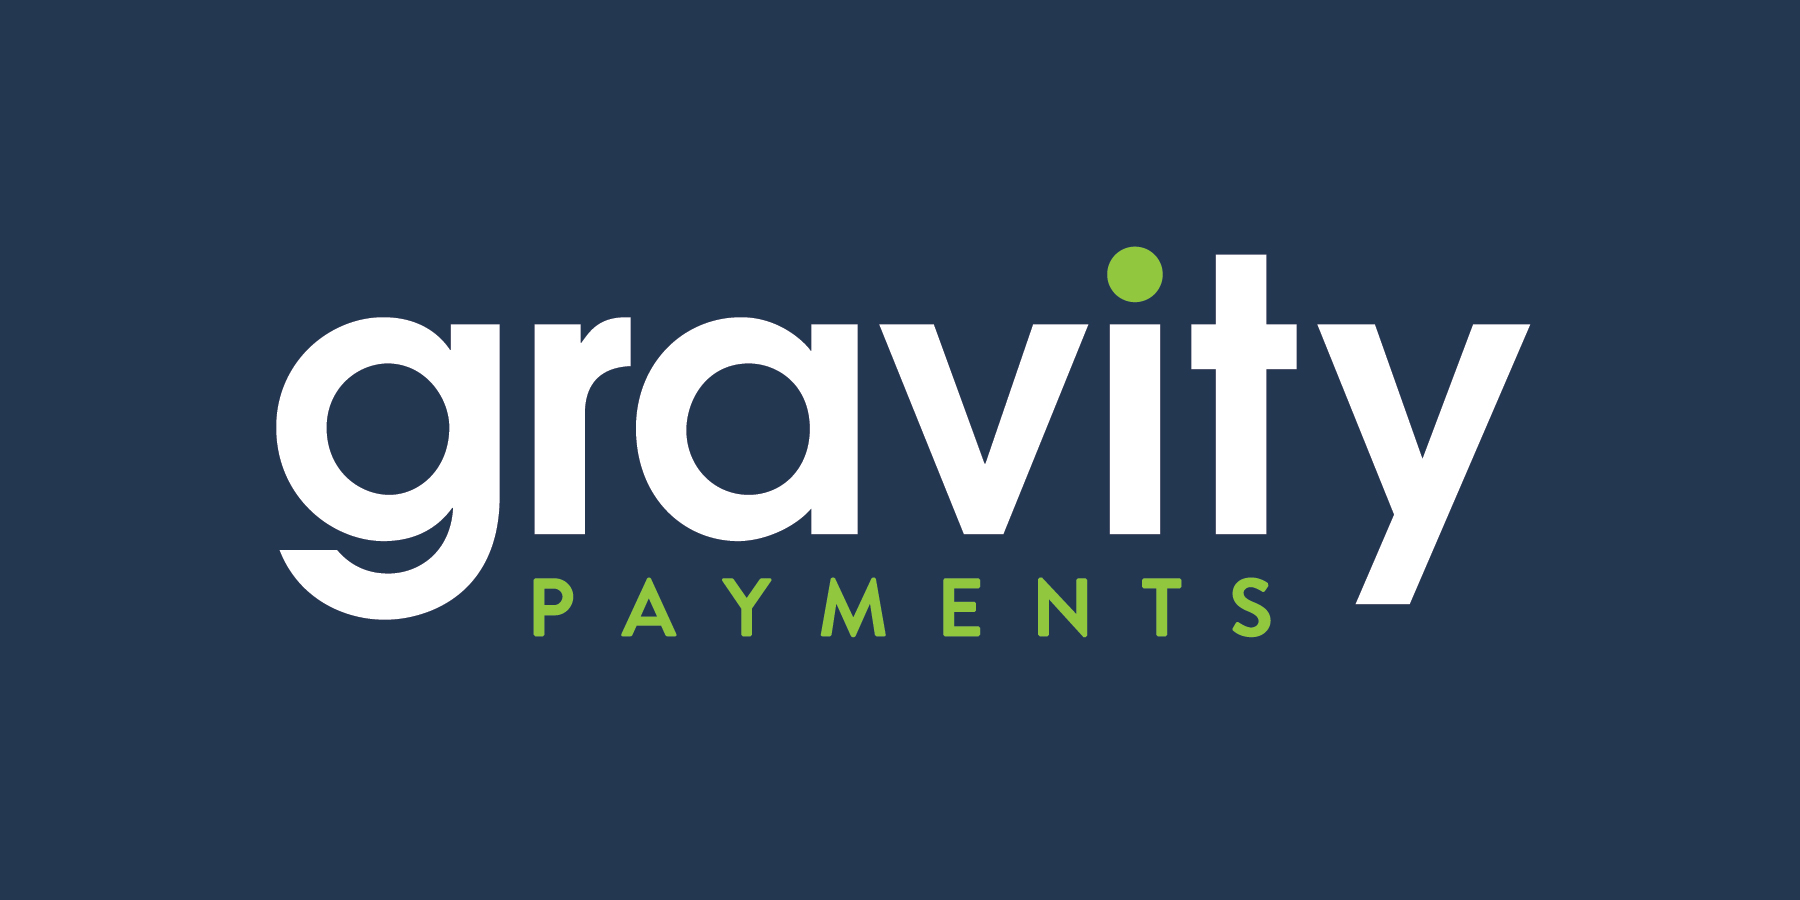 Gravity Payments